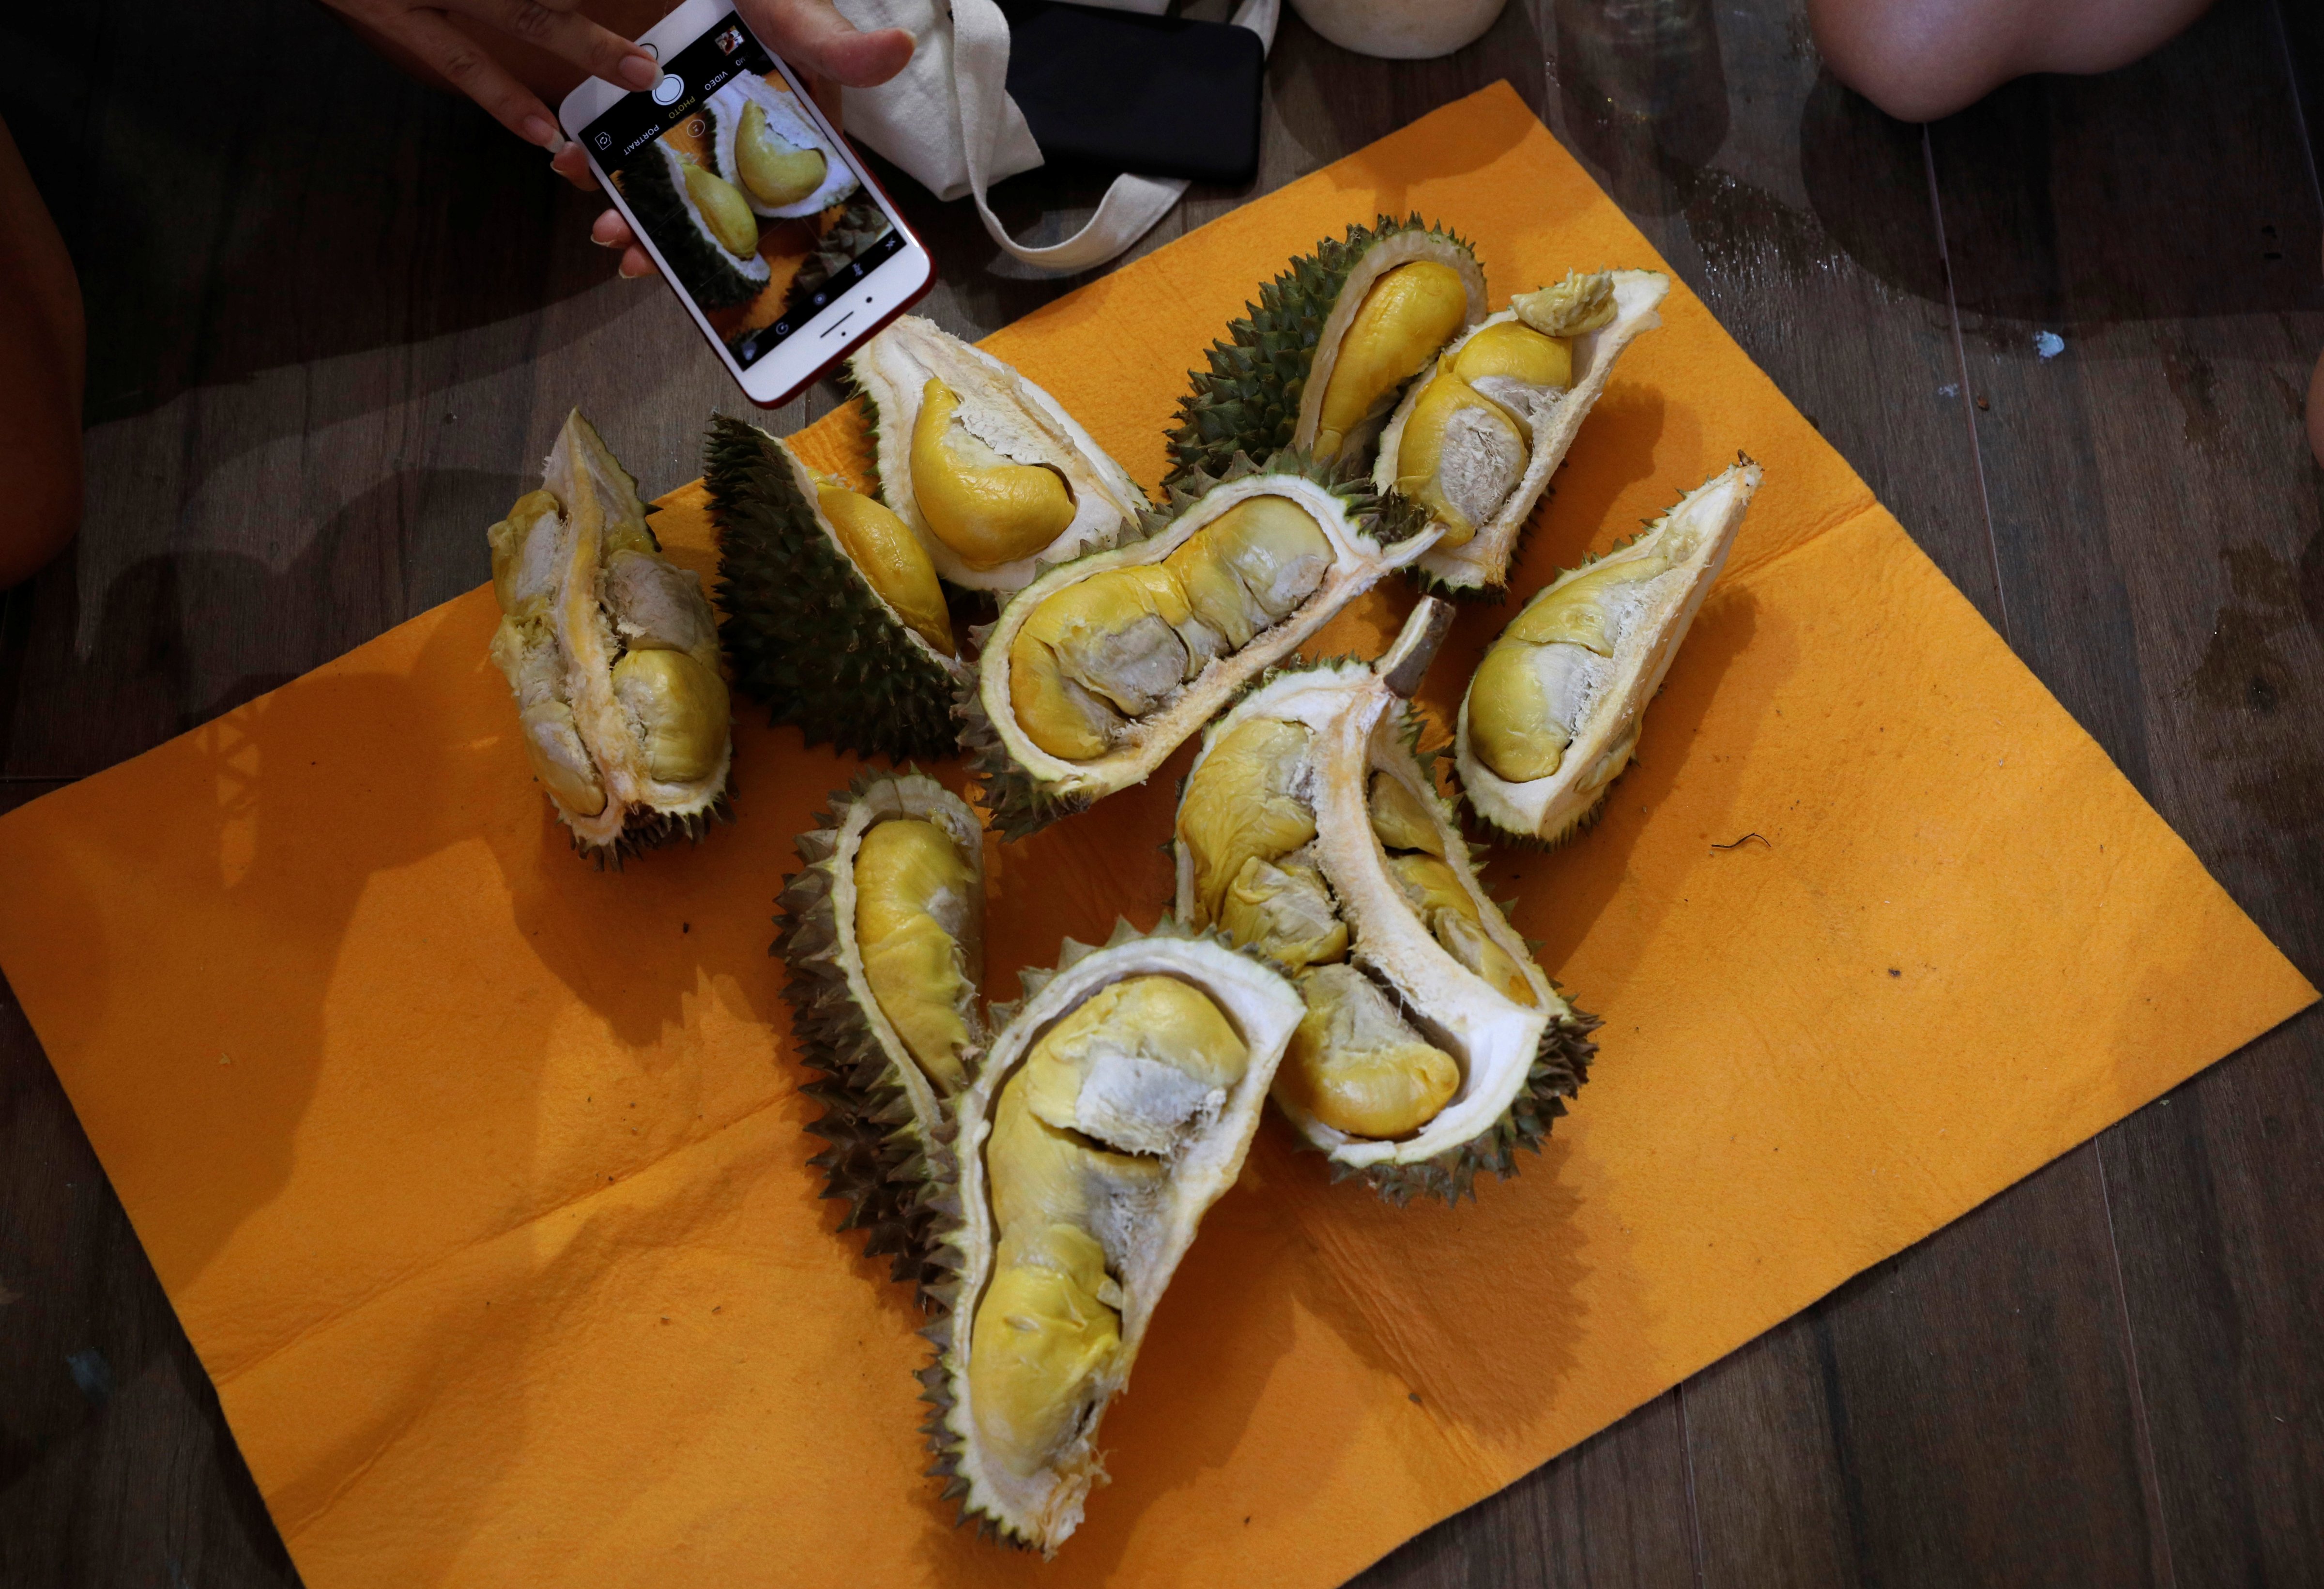 Participants take photos of durians after the Durian Run, a charity event, in Singapore on July 23, 2017. (Edgar Su—Reuters)